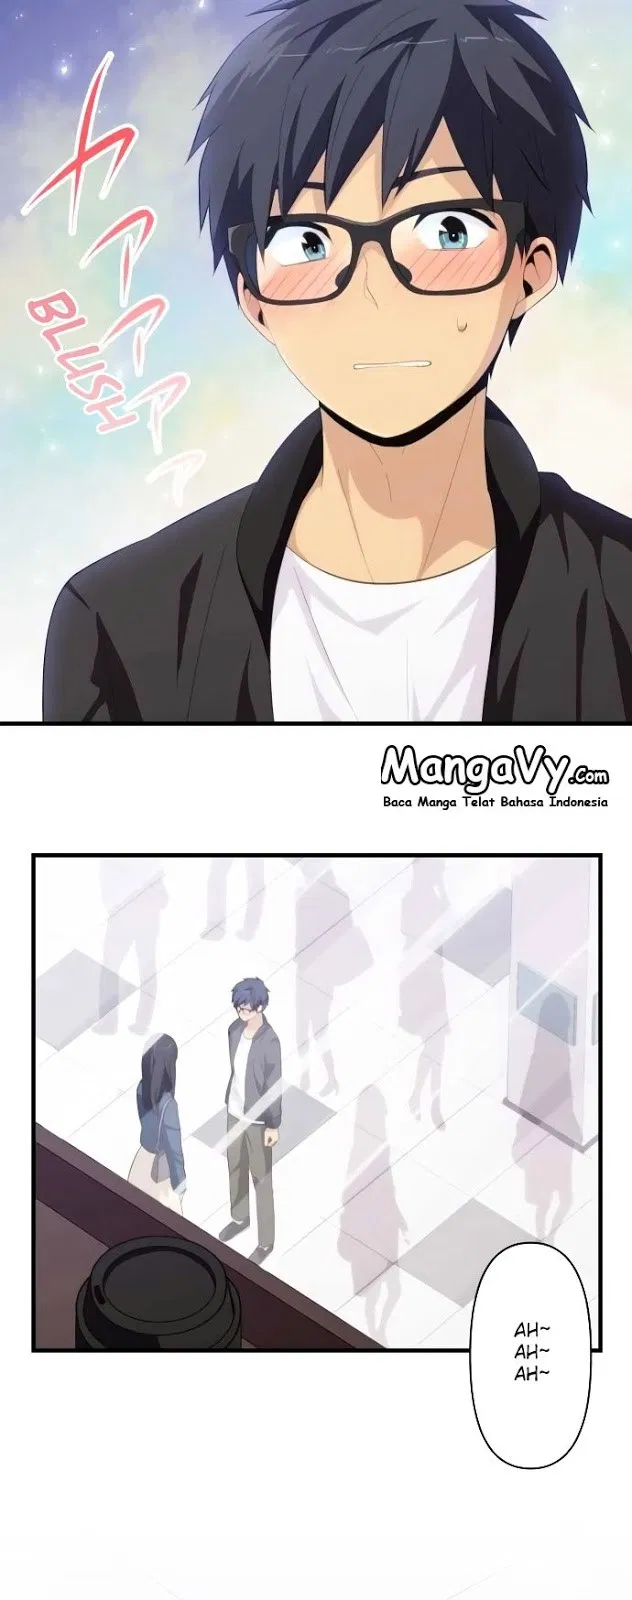 ReLIFE Chapter 173